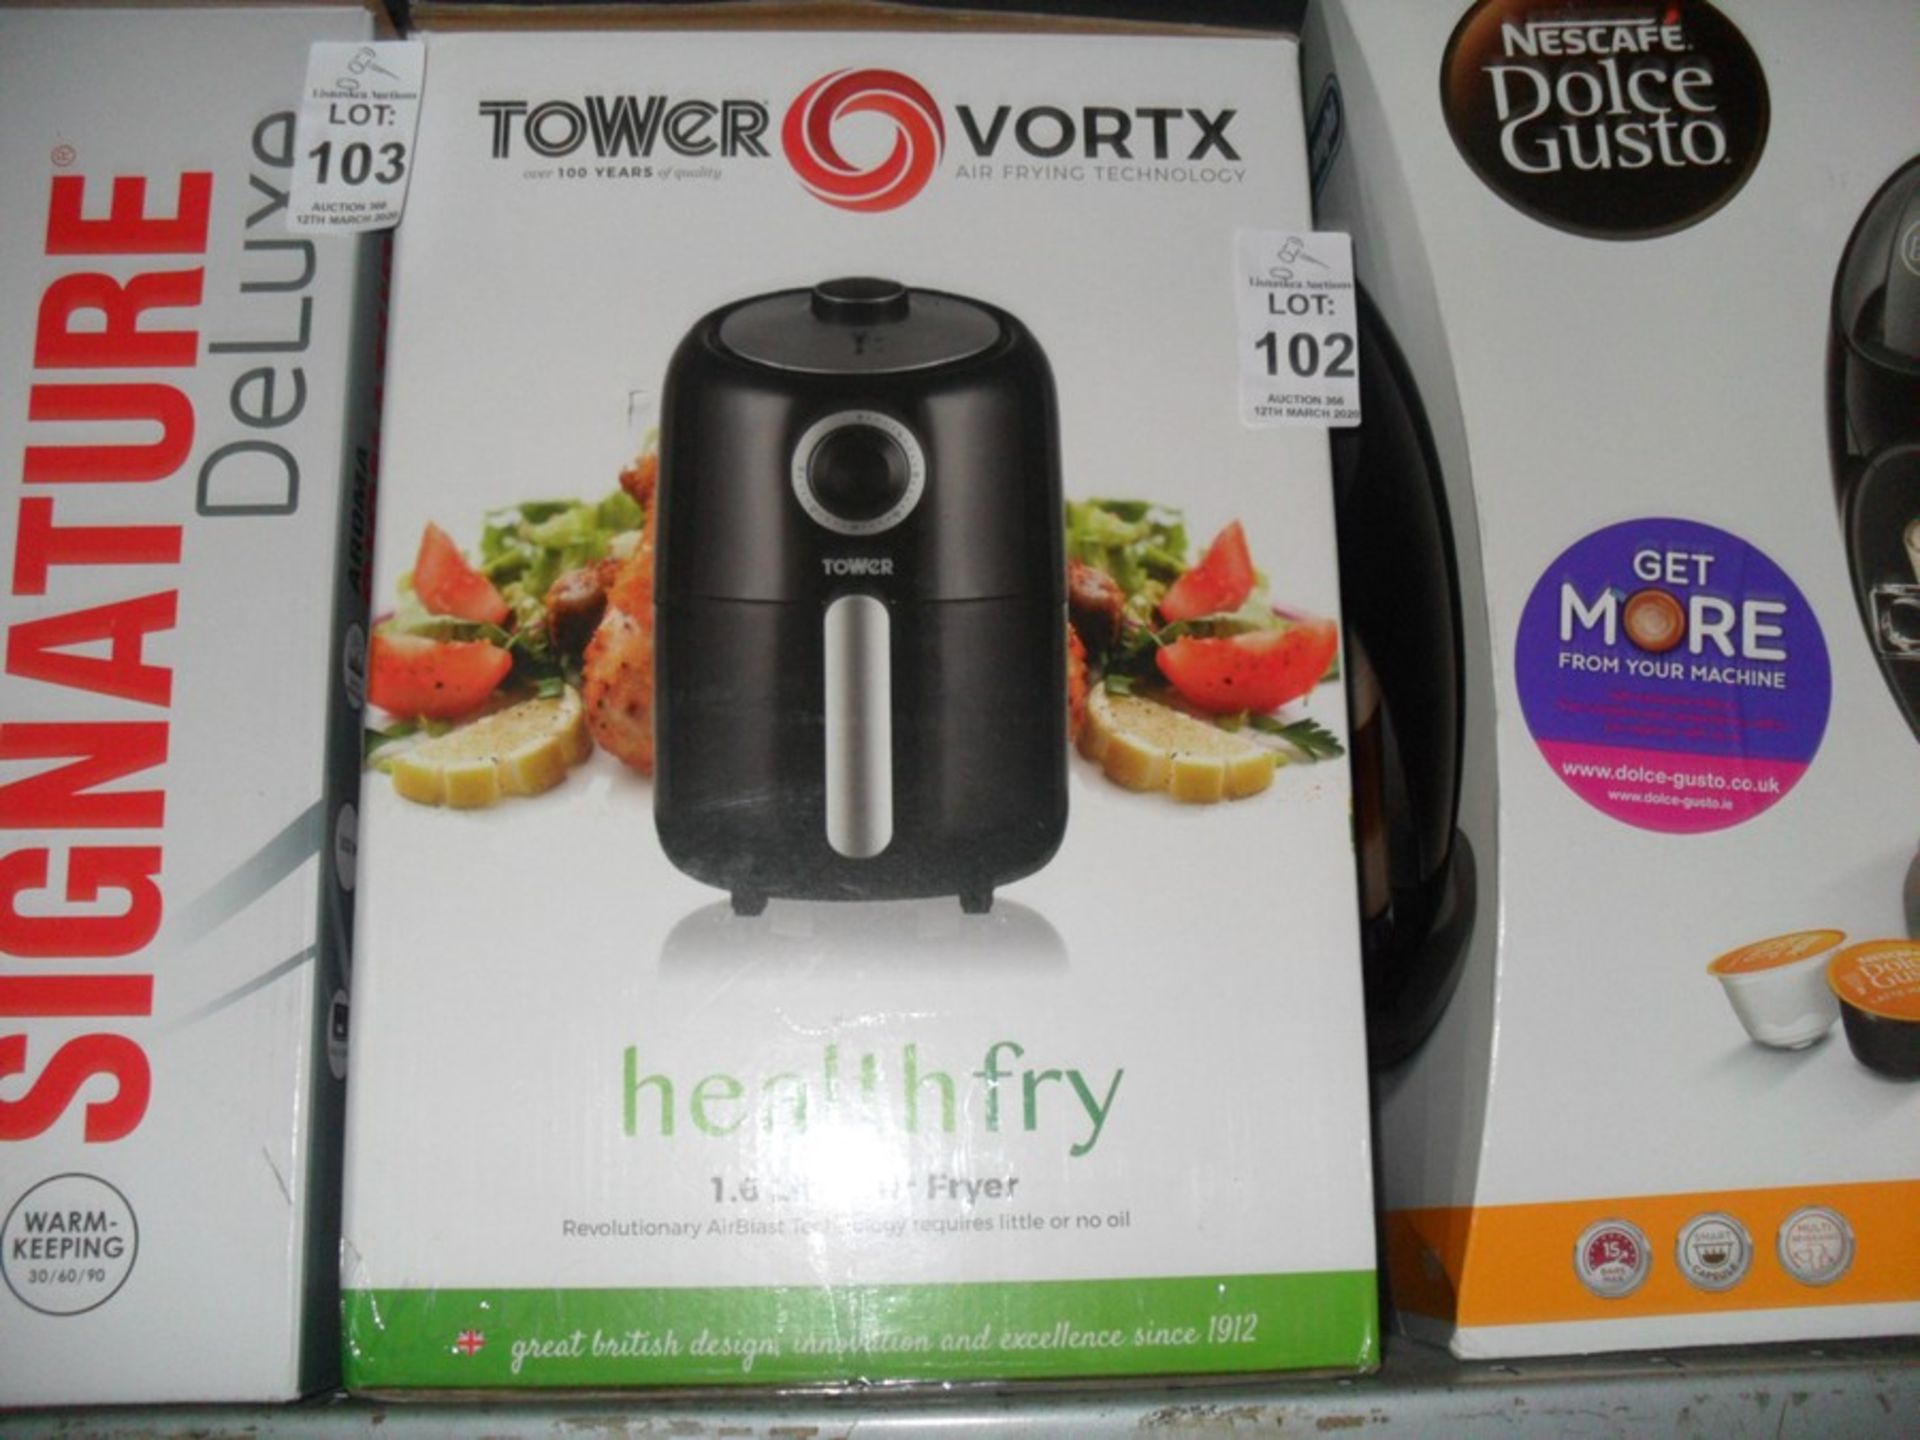 TOWER VORTX 1.6L HEALTHFRY (SHOP CLEARANCE)